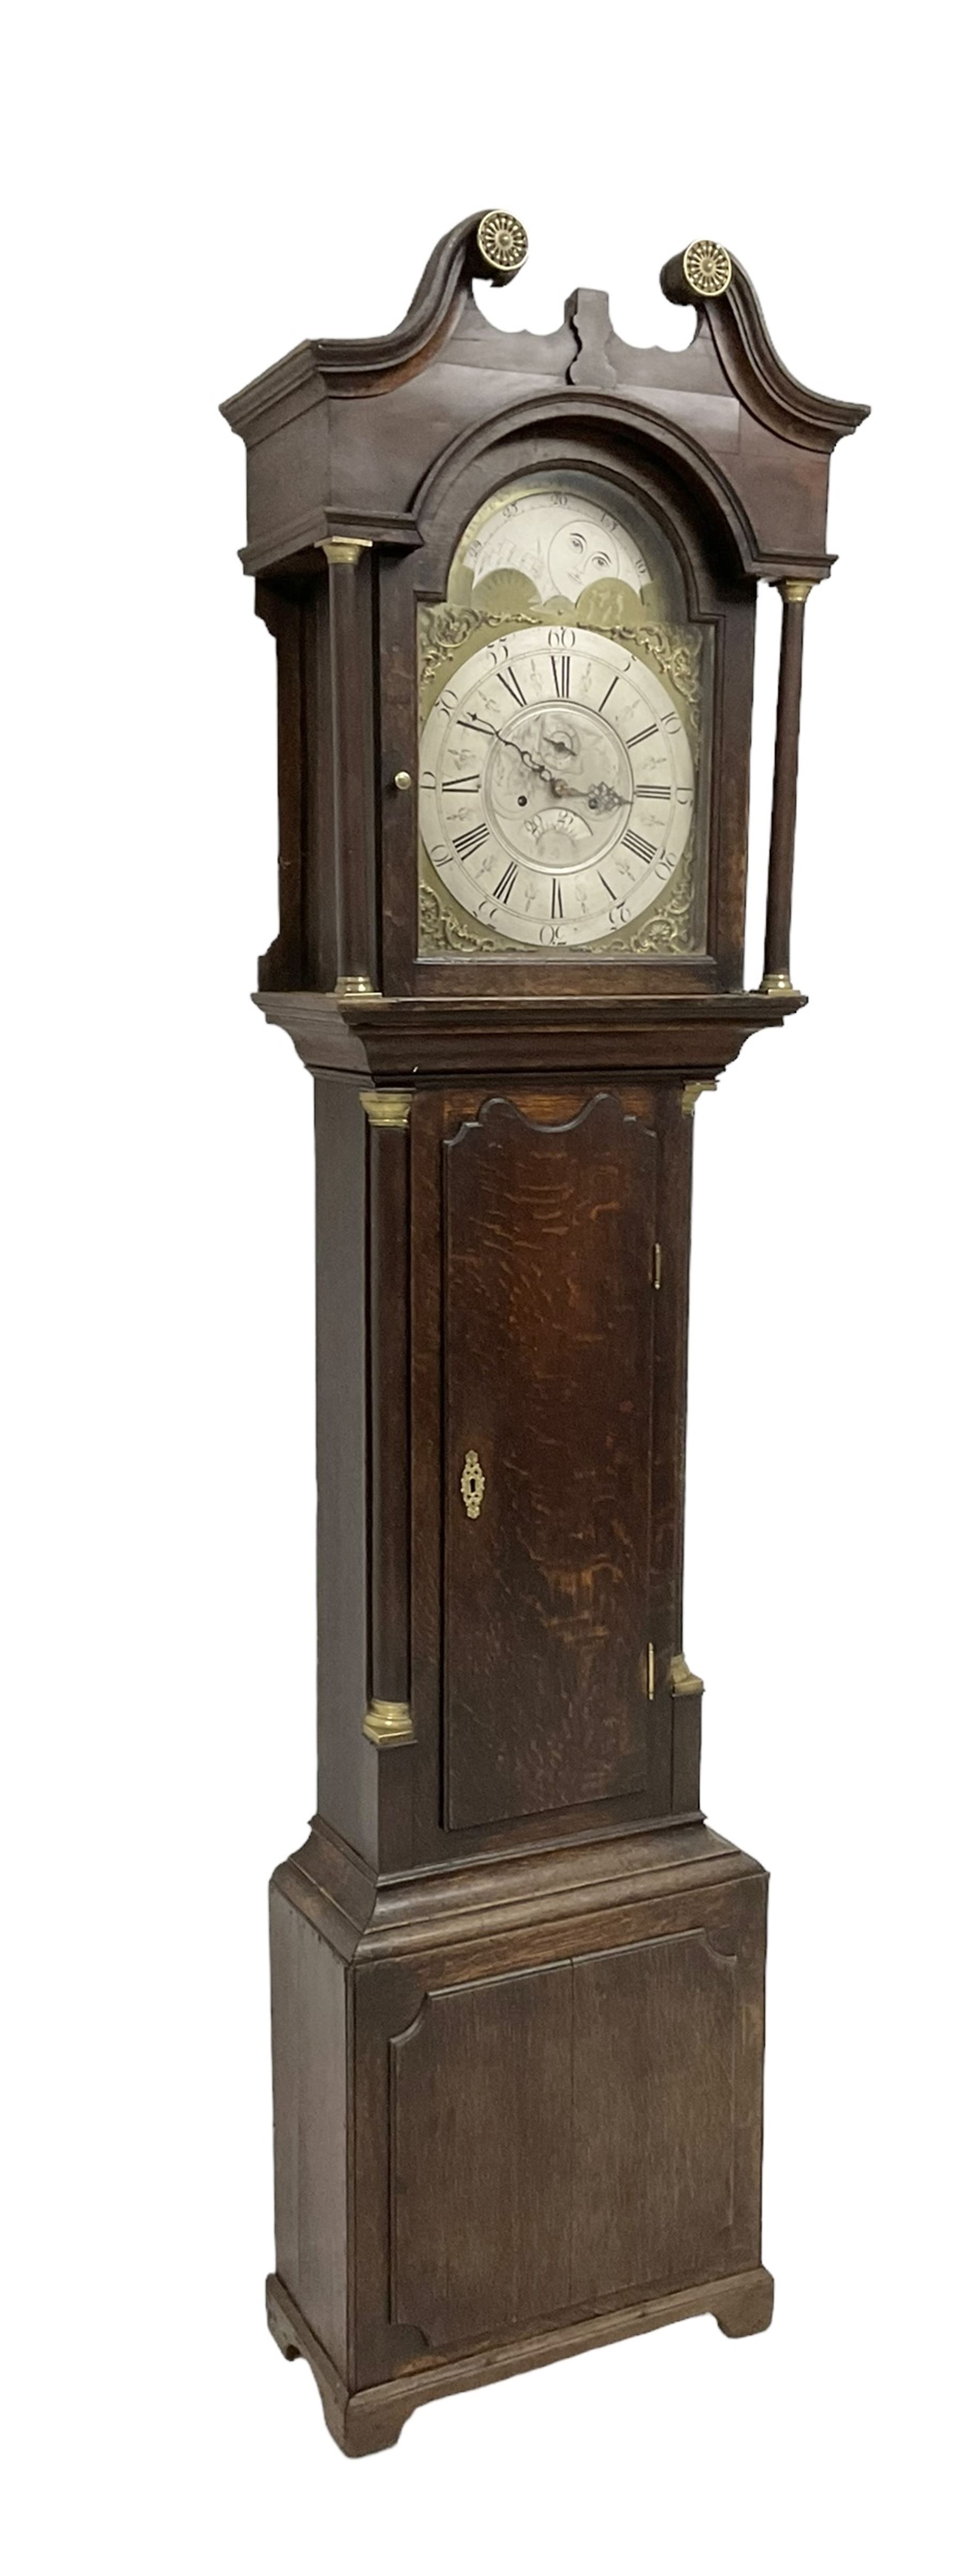 Thomas Lister of Halifax - Late 18th century oak cased 8-day longcase clock with a swans neck pedime - Image 3 of 6